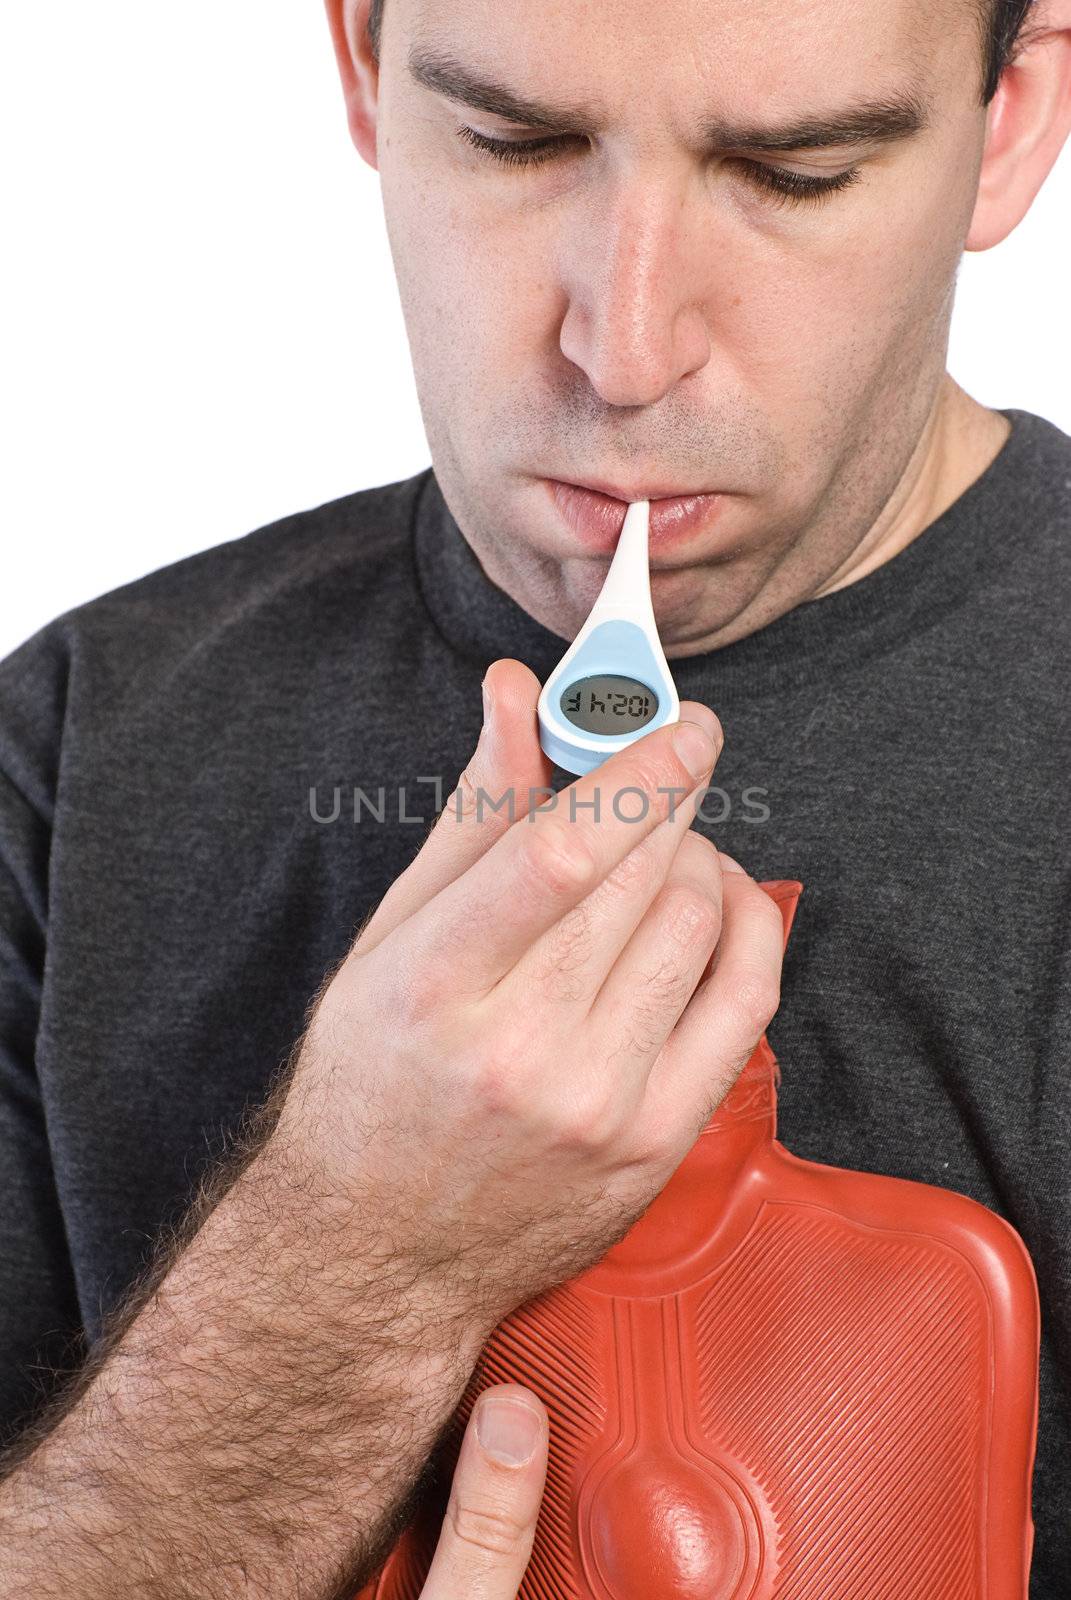 Closeup view of a young man taking his temperature and showing a fever of 102.4 degrees fahrenheit, isolated against a white background